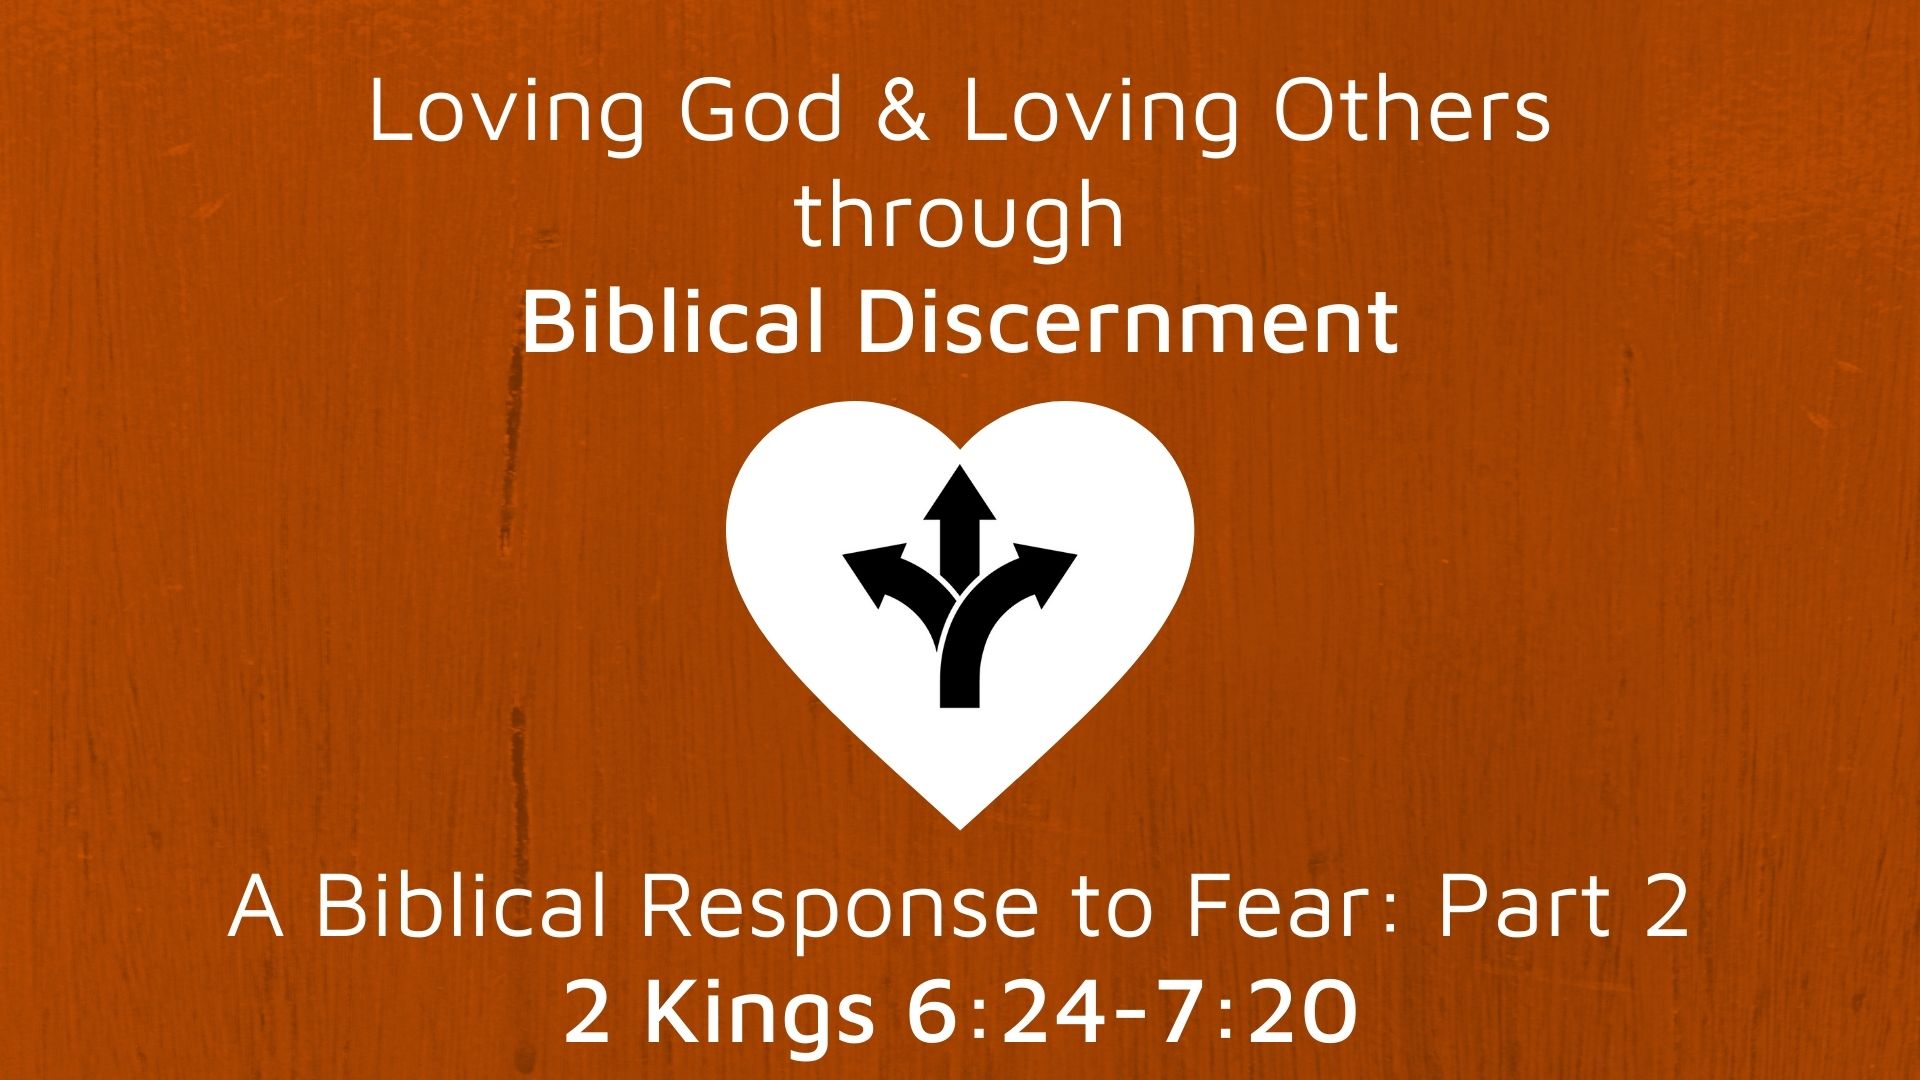 A Biblical Response to Fear - Part 2 (2 Kings 6:24-7:20) Image